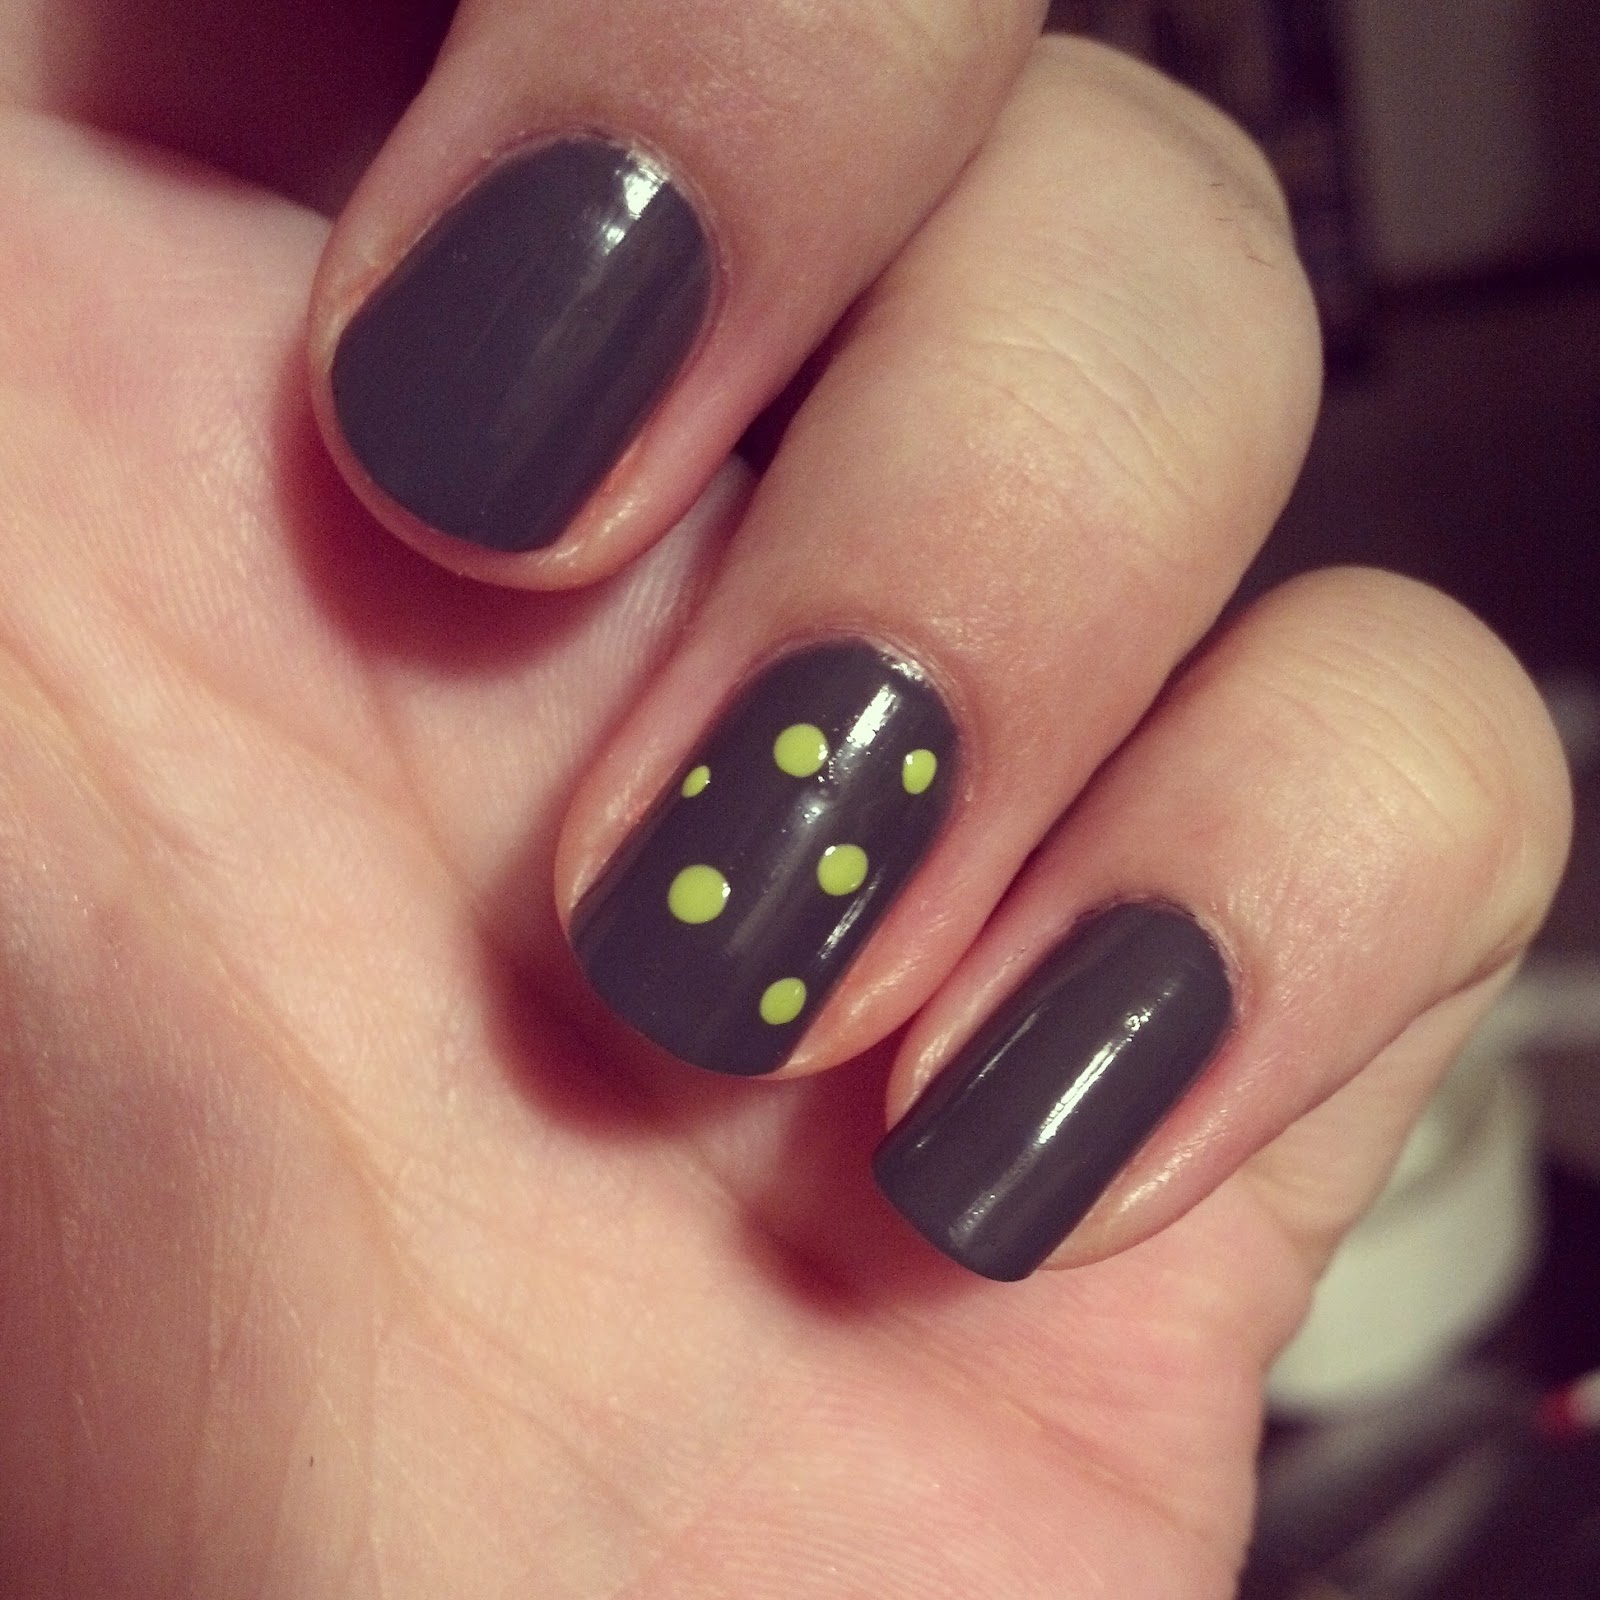 An Onion Exposed: Nails: Tri-Color Polka Dots